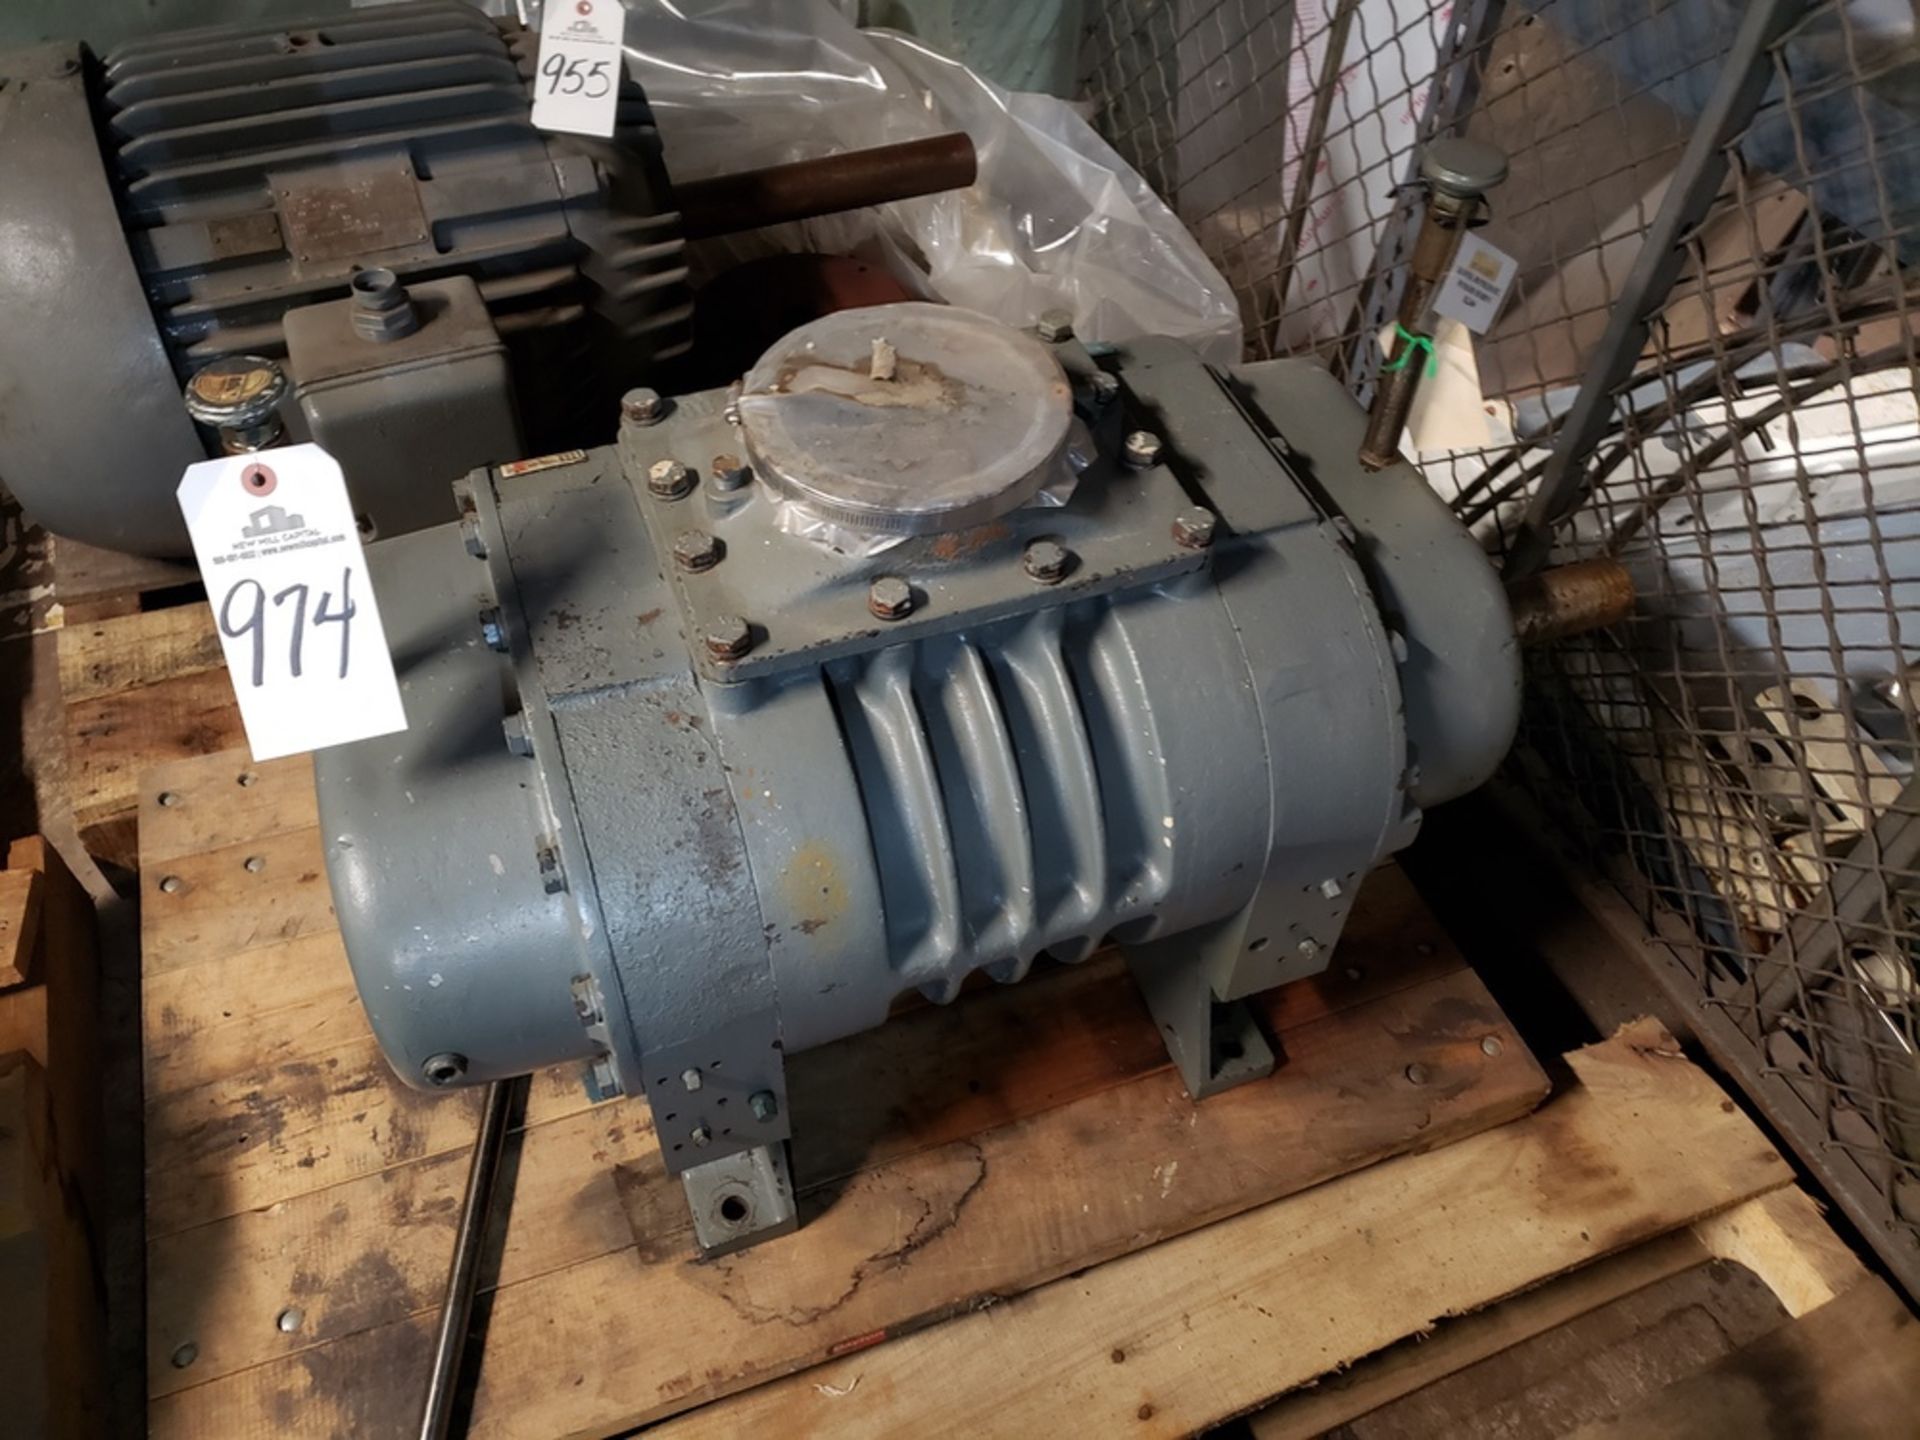 Tuthill Rotary Positive Displacement Blower, M# 5511-46L3 - Subject to Bulk Bid Lot | Rig Fee: $50